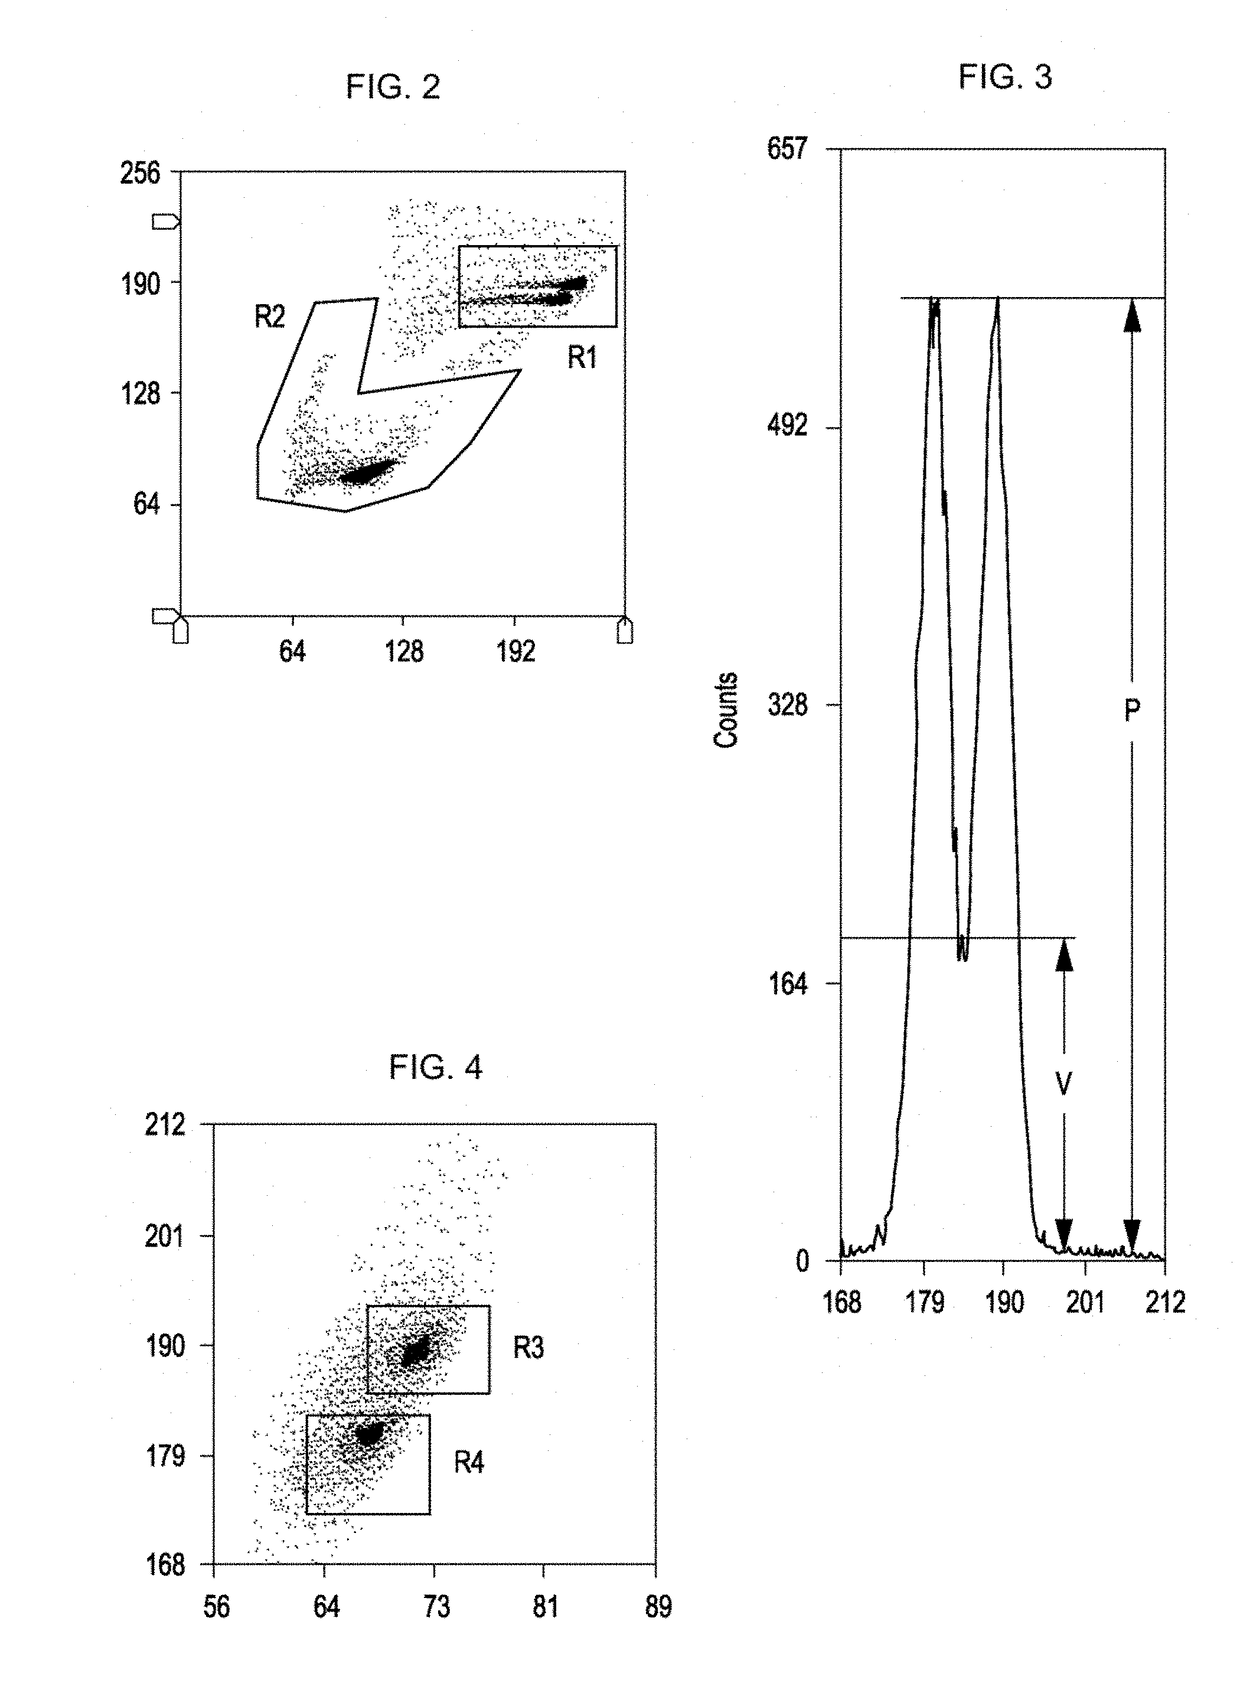 Sperm processing method, apparatus and related media compositions